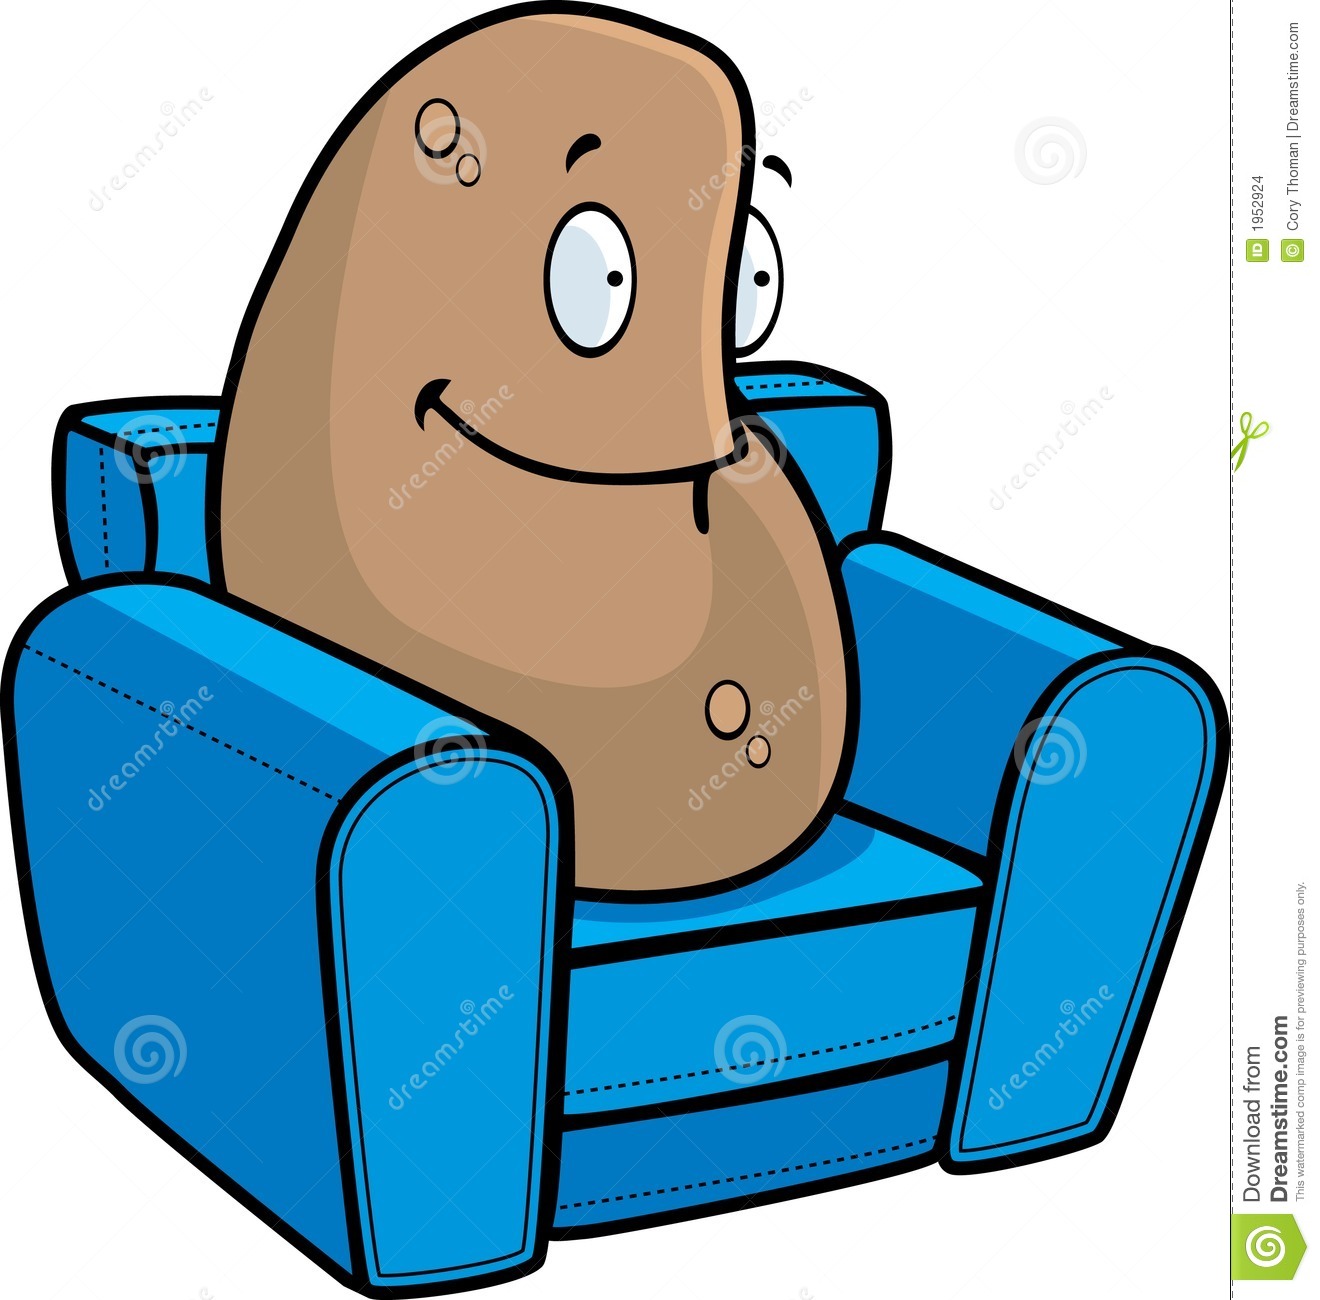 Couch Potato Stock Images   Image  1952924